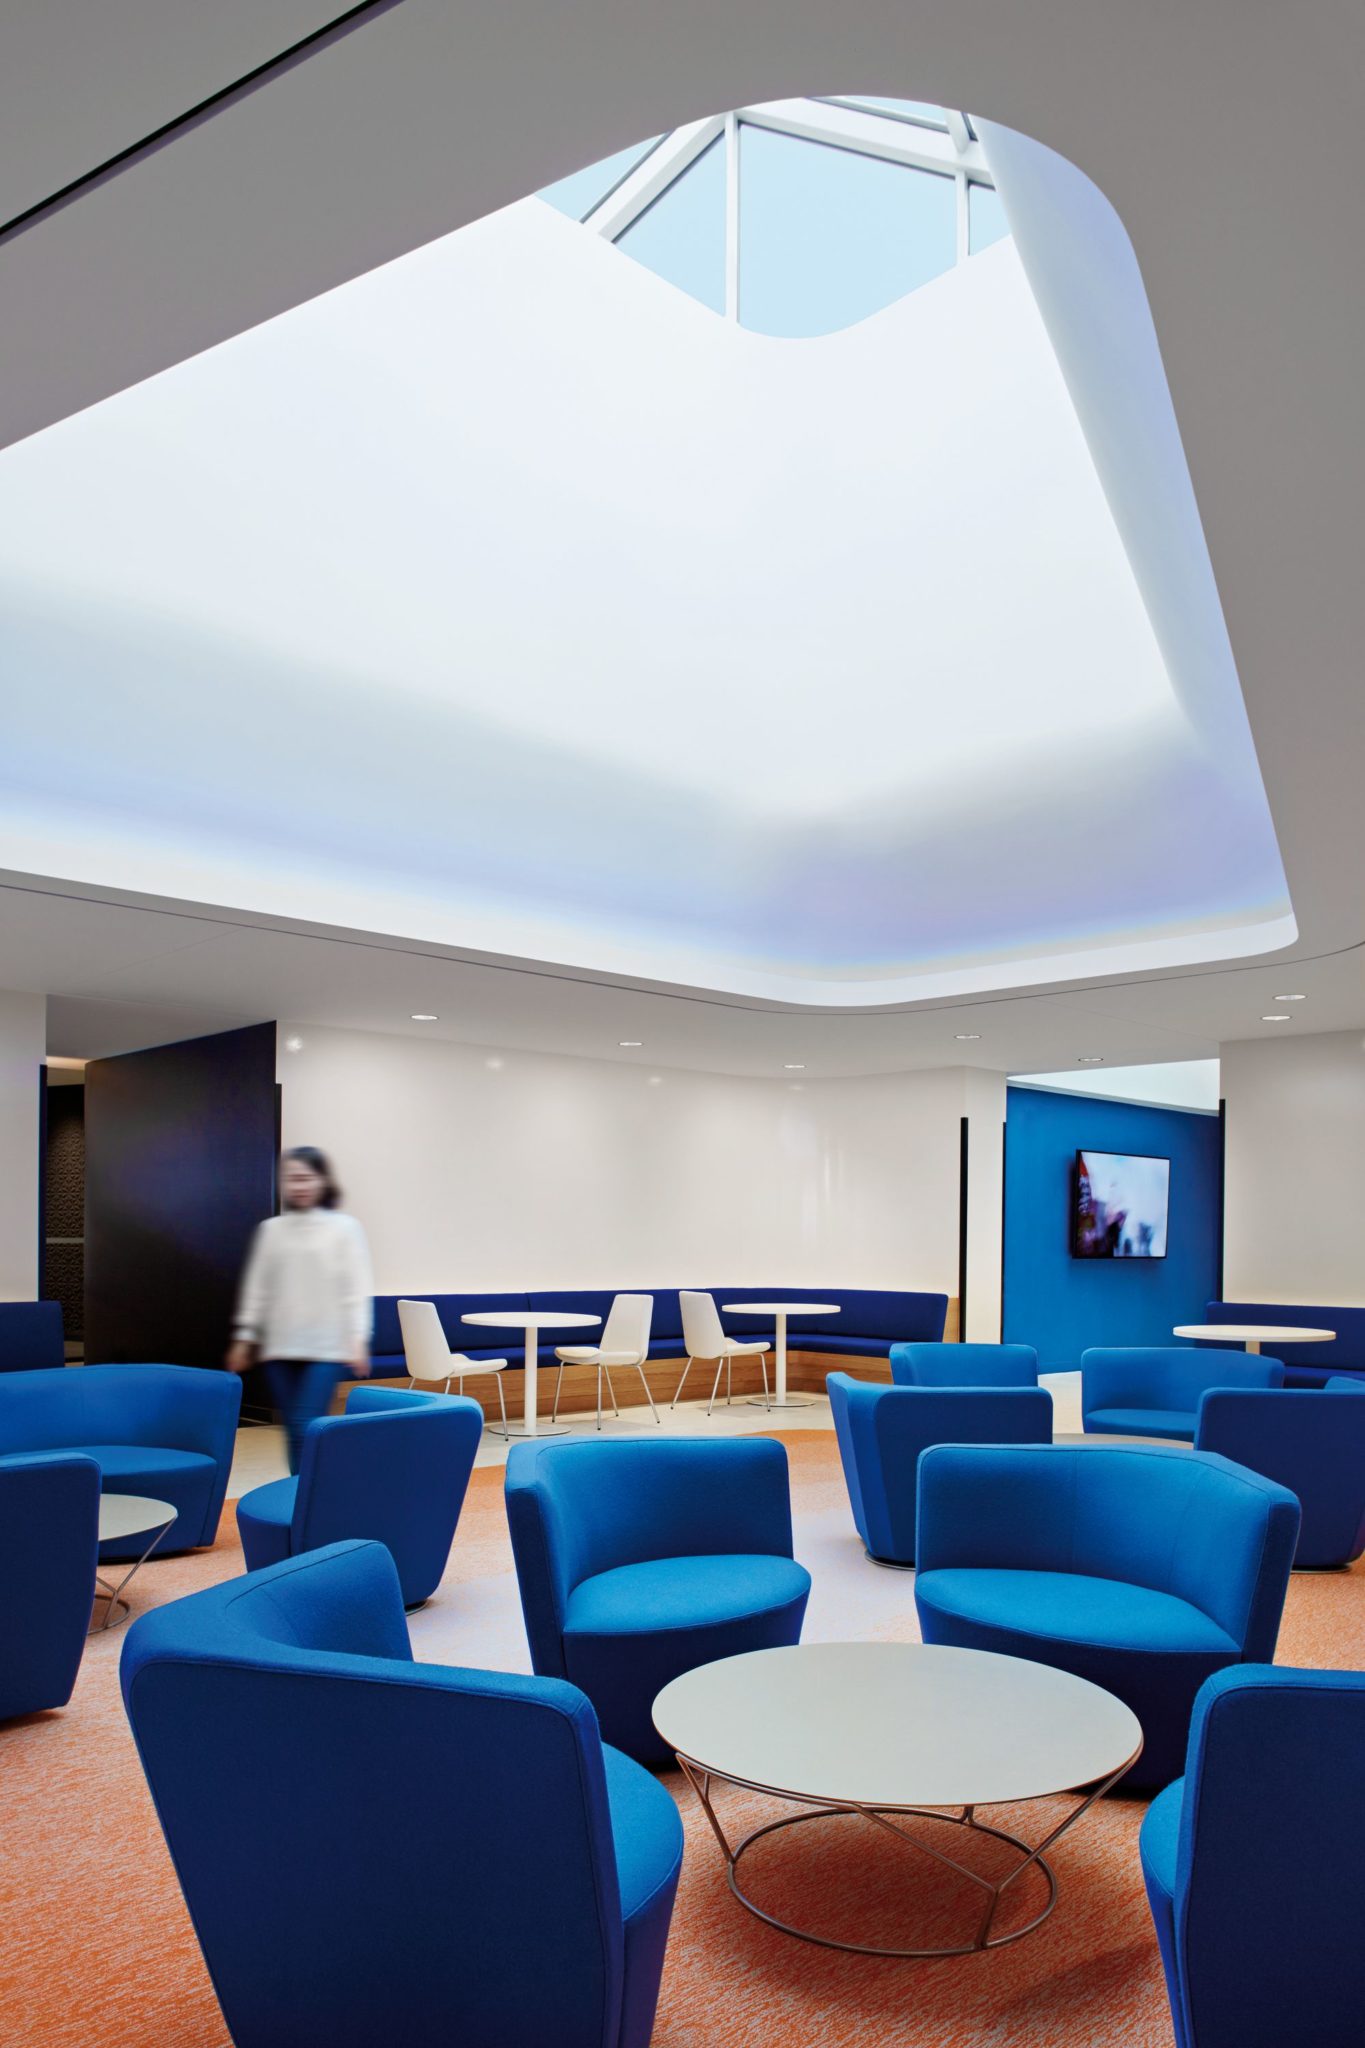 Ceiling and skylight bring natural light into the lunch room